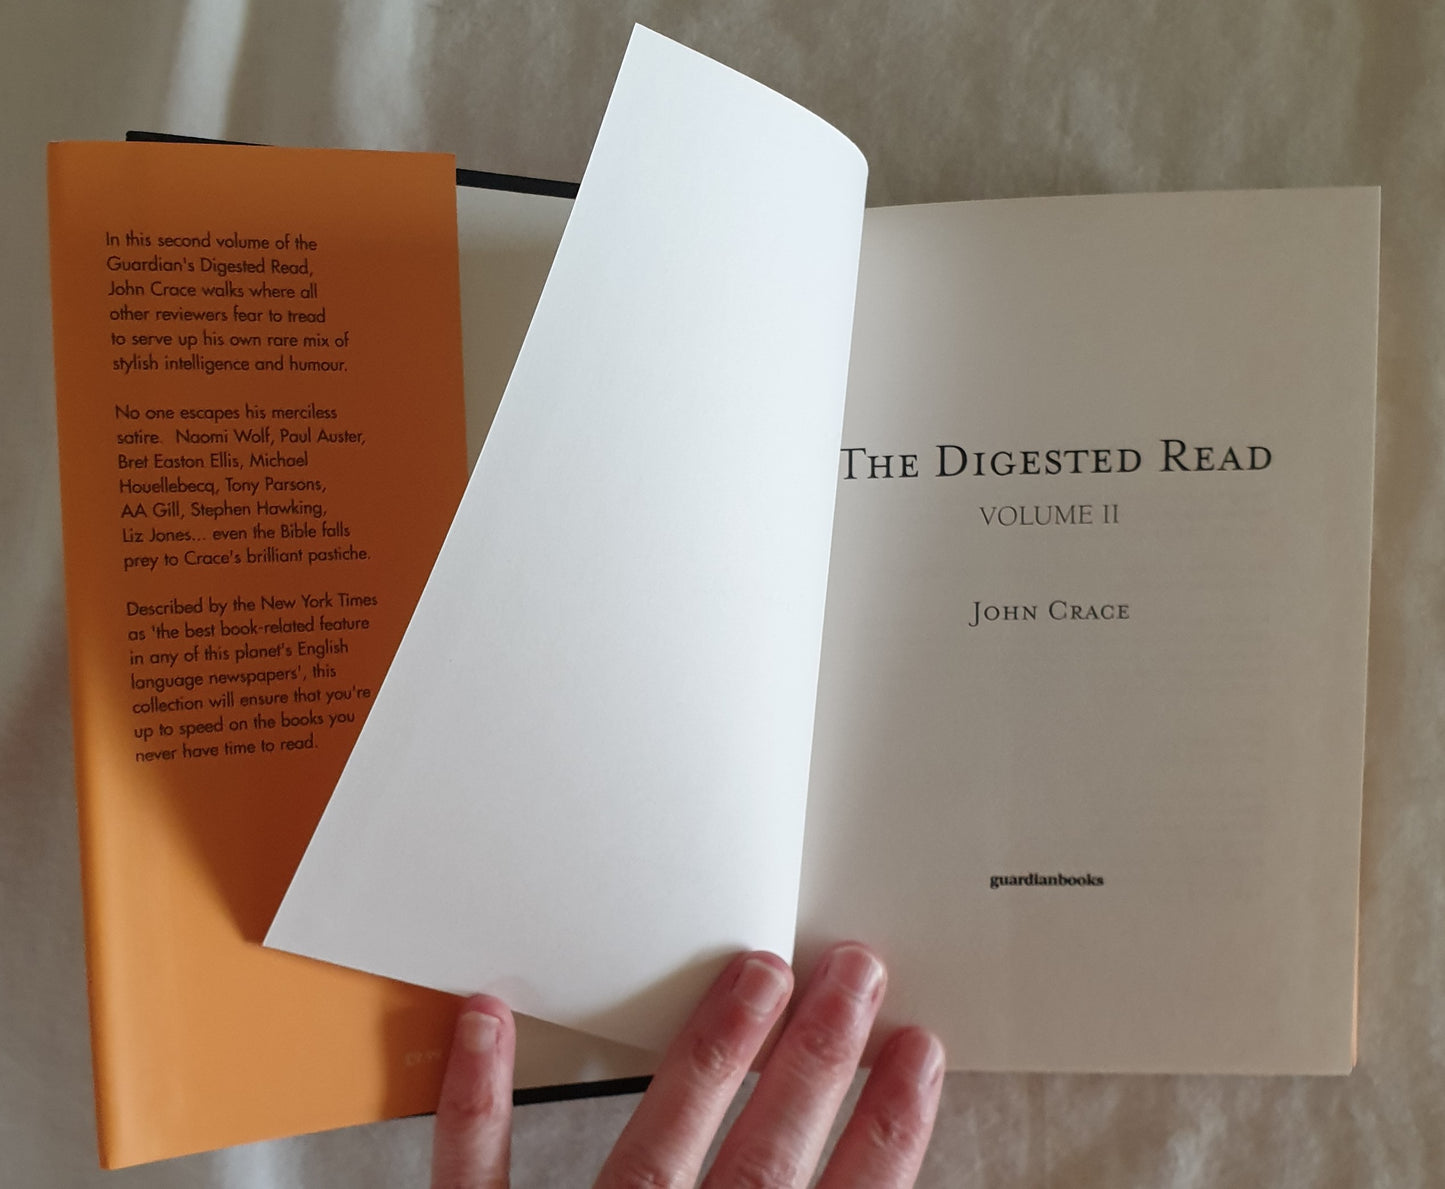 The Digested Read Volume II by John Grace